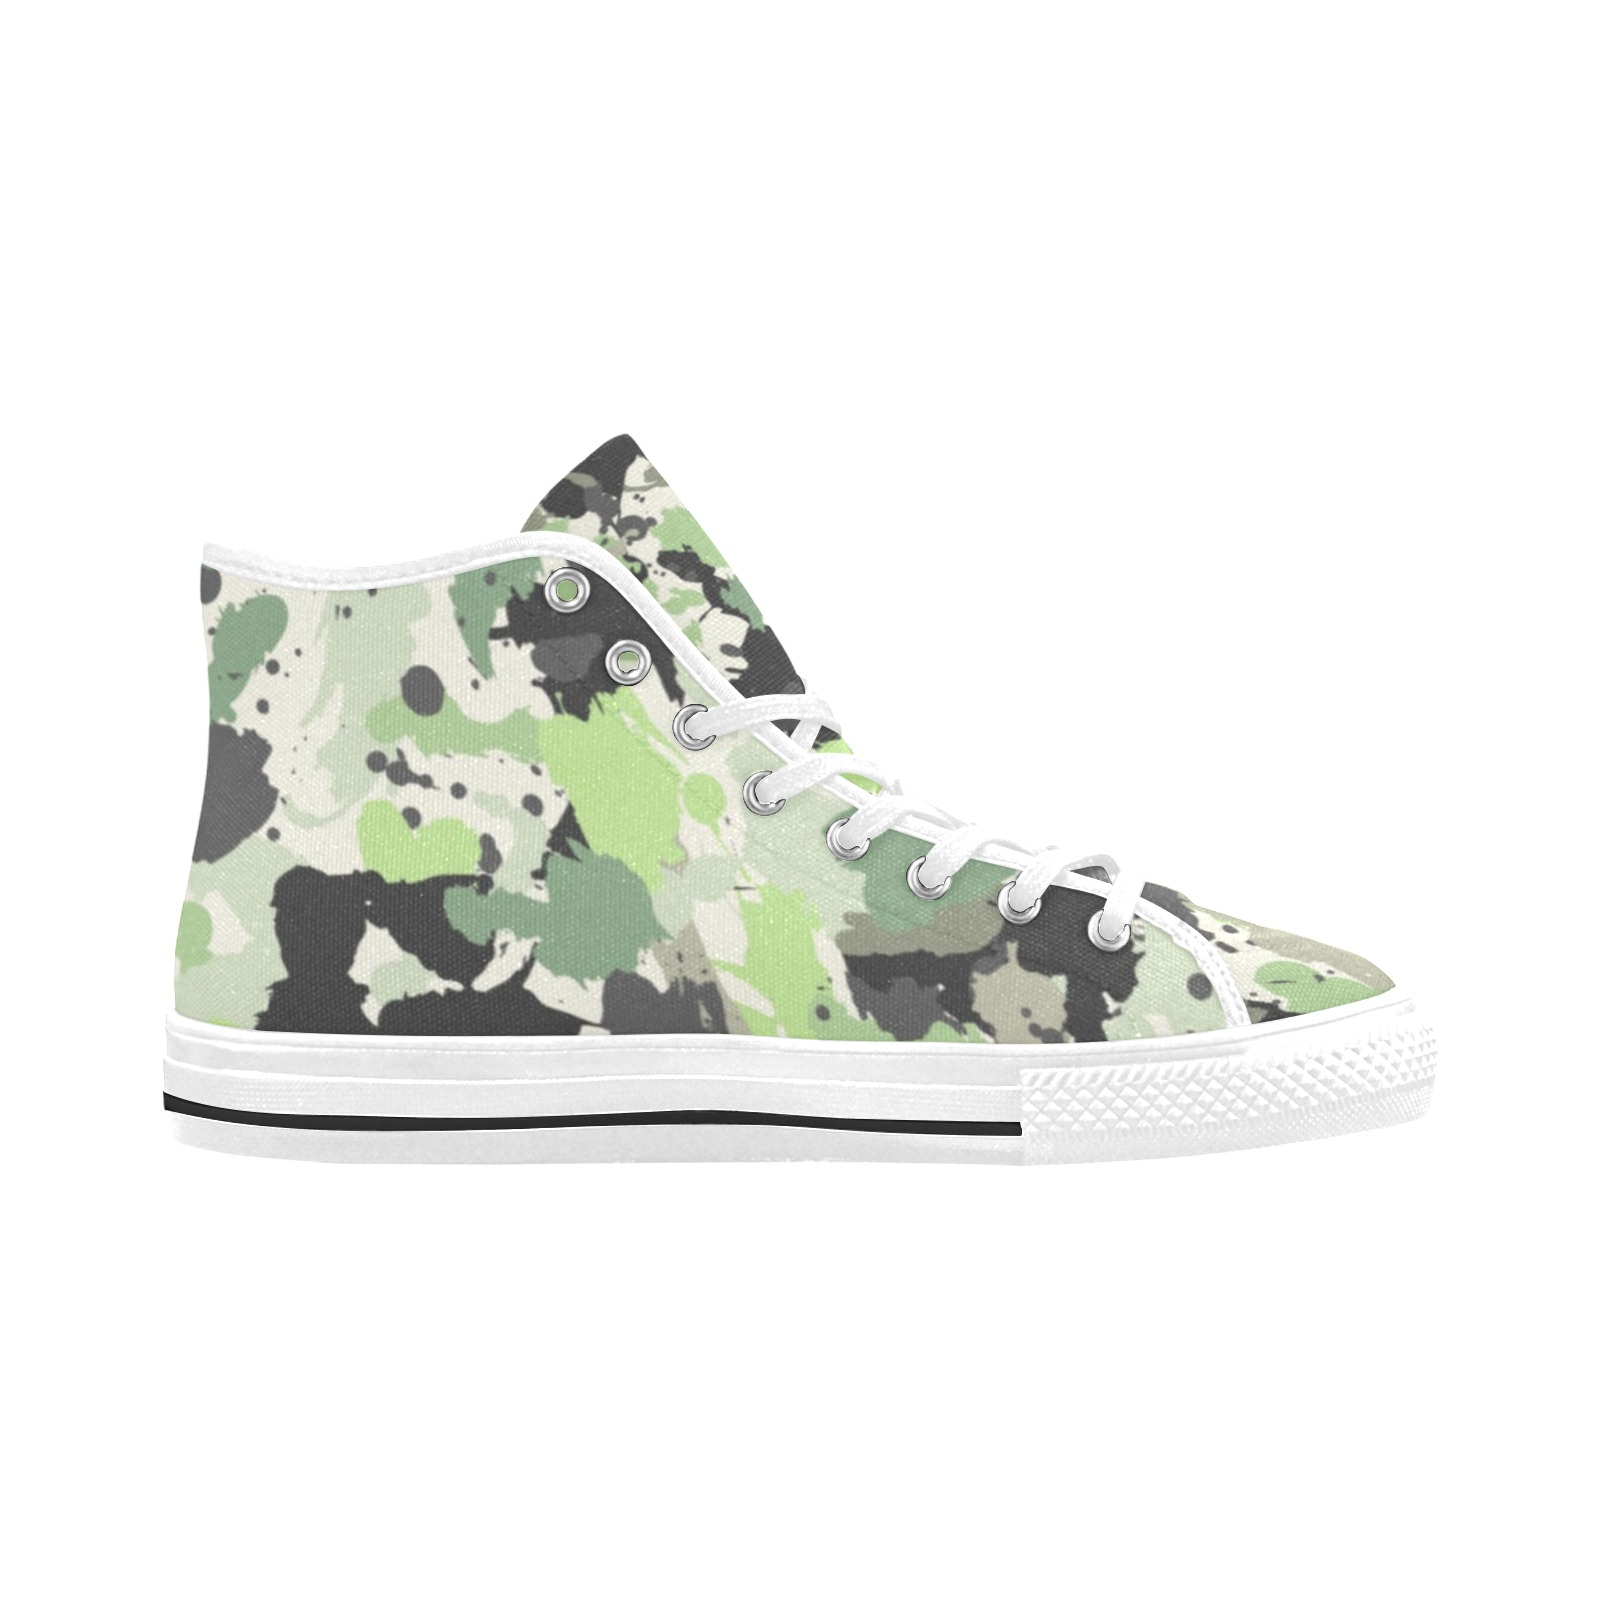 Modern camouflaged texture_01 Vancouver H Women's Canvas Shoes (1013-1)